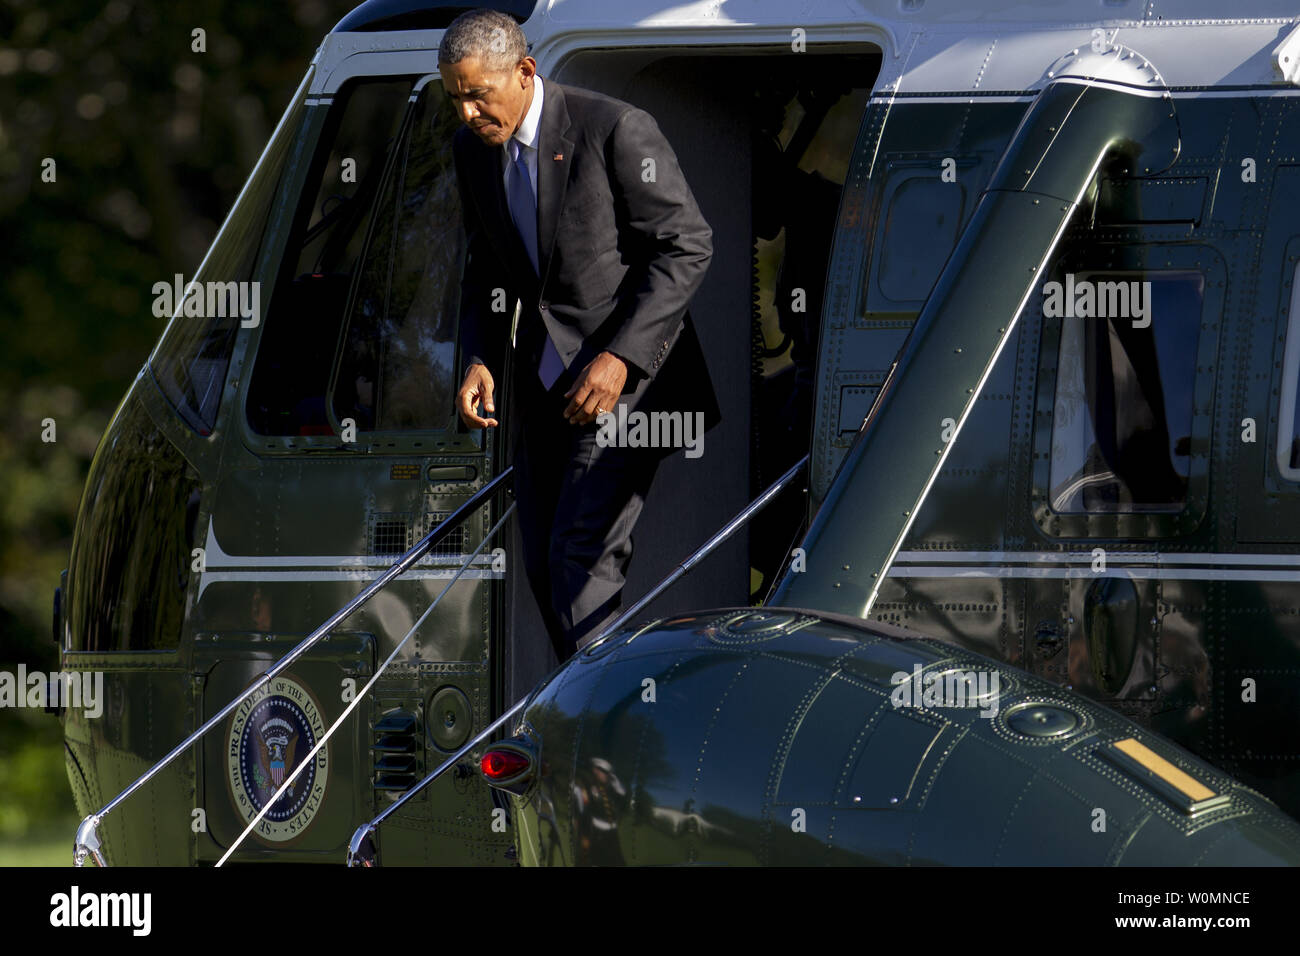 U.S. President Barack Obama walks off of Marine One after landing on the South Lawn of the White House in Washington, D.C., U.S., on Tuesday, Aug. 25. Obama pledged yesterday to provide incentives to support investments in renewable energy, saying the industry will thrive despite opposition by Republicans and fossil-fuel suppliers. Photo by Andrew Harrer/UPI Stock Photo